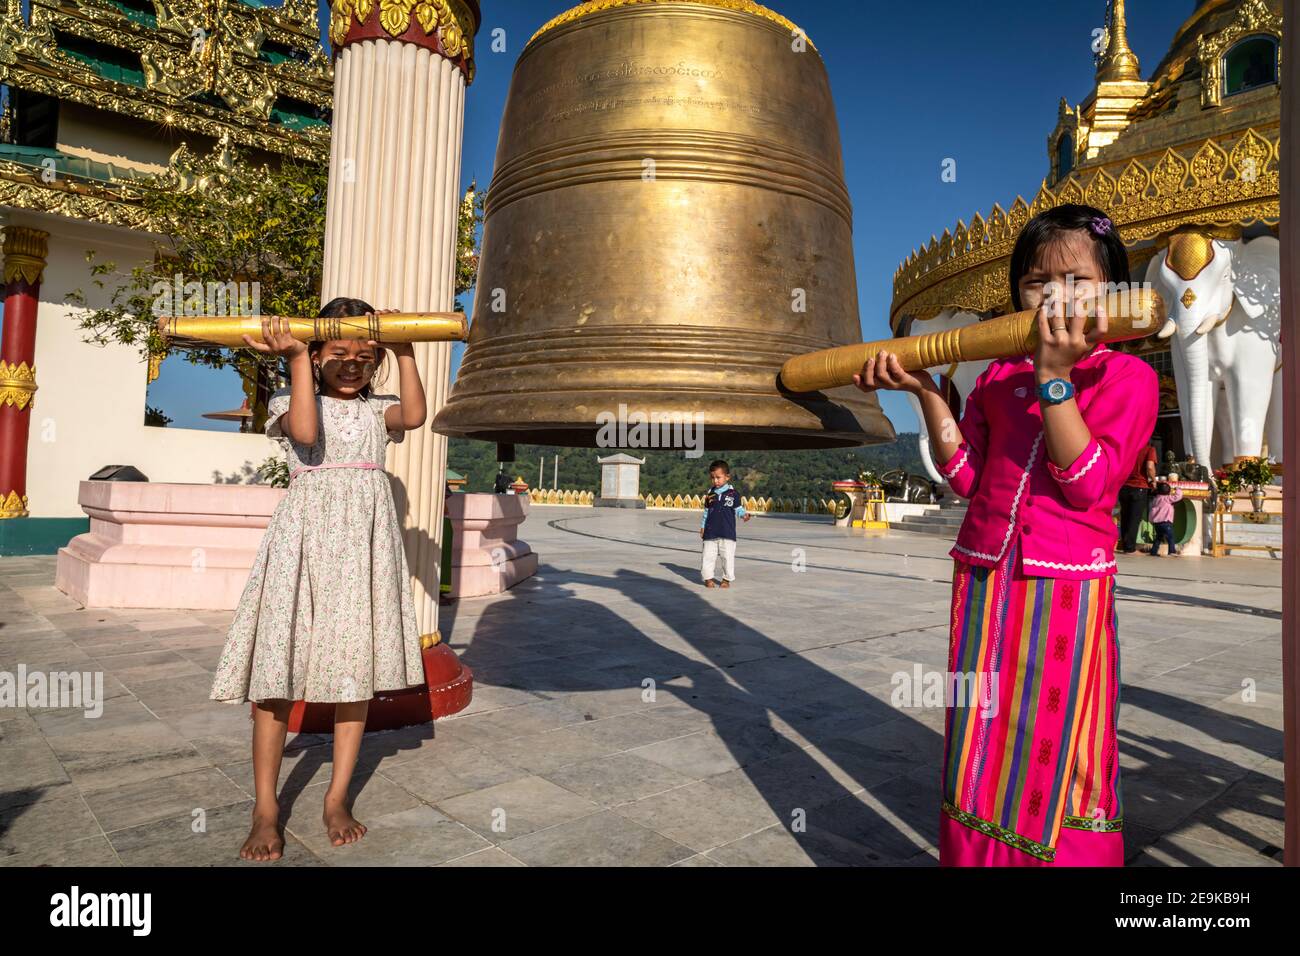 Shwe Moe Taung Pagoda near of Myikyina in northern Myanmar, where refugees have been living in IDP refugee camps for many years. Stock Photo